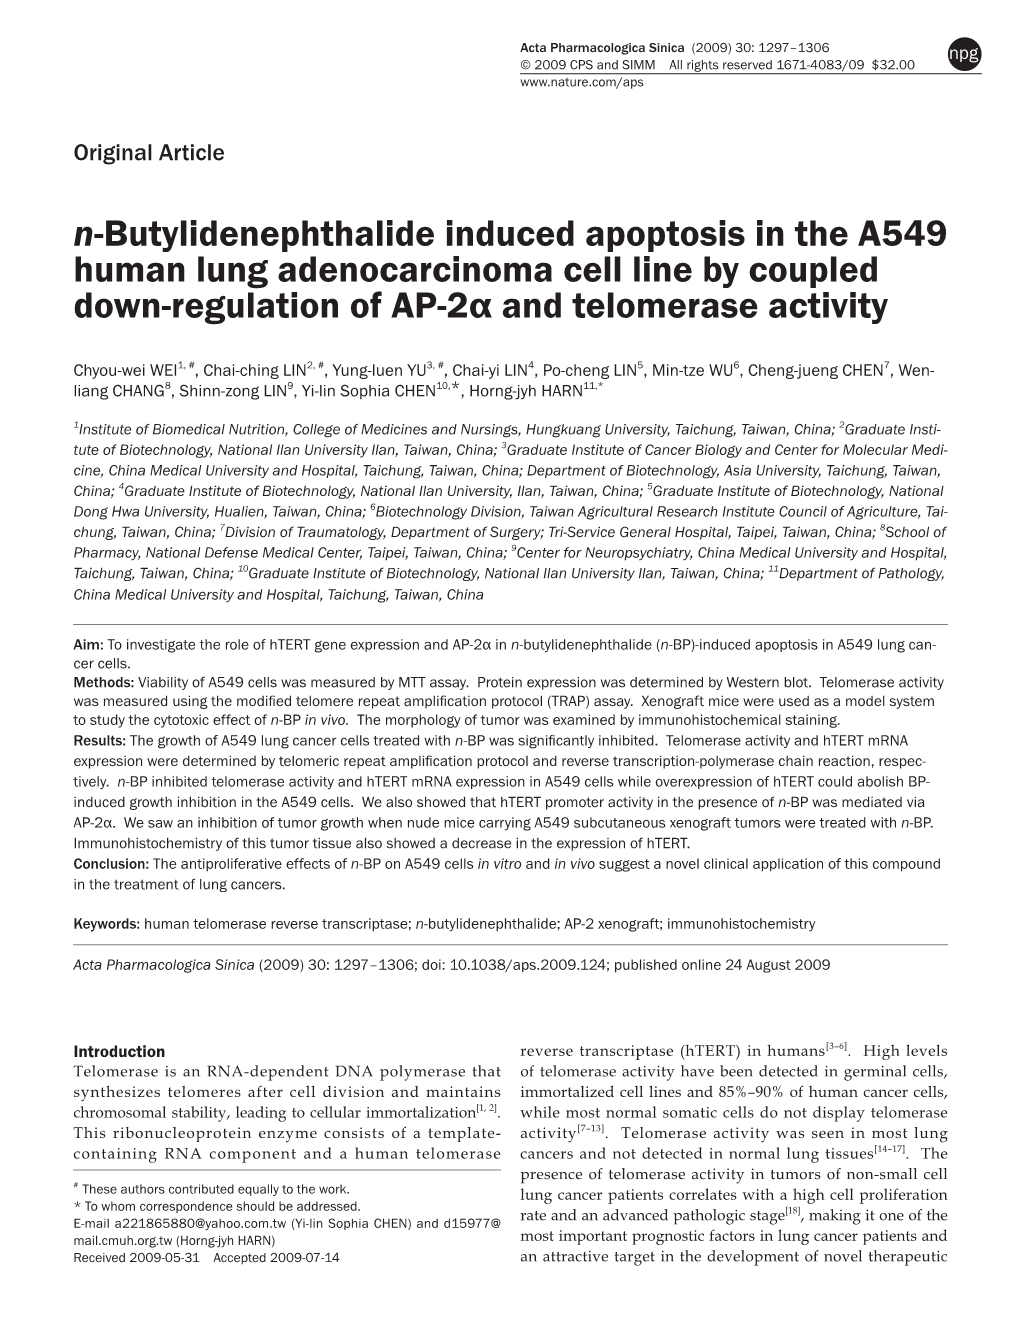 N-Butylidenephthalide Induced Apoptosis in the A549 Human Lung Adenocarcinoma Cell Line by Coupled Down-Regulation of AP-2Α and Telomerase Activity